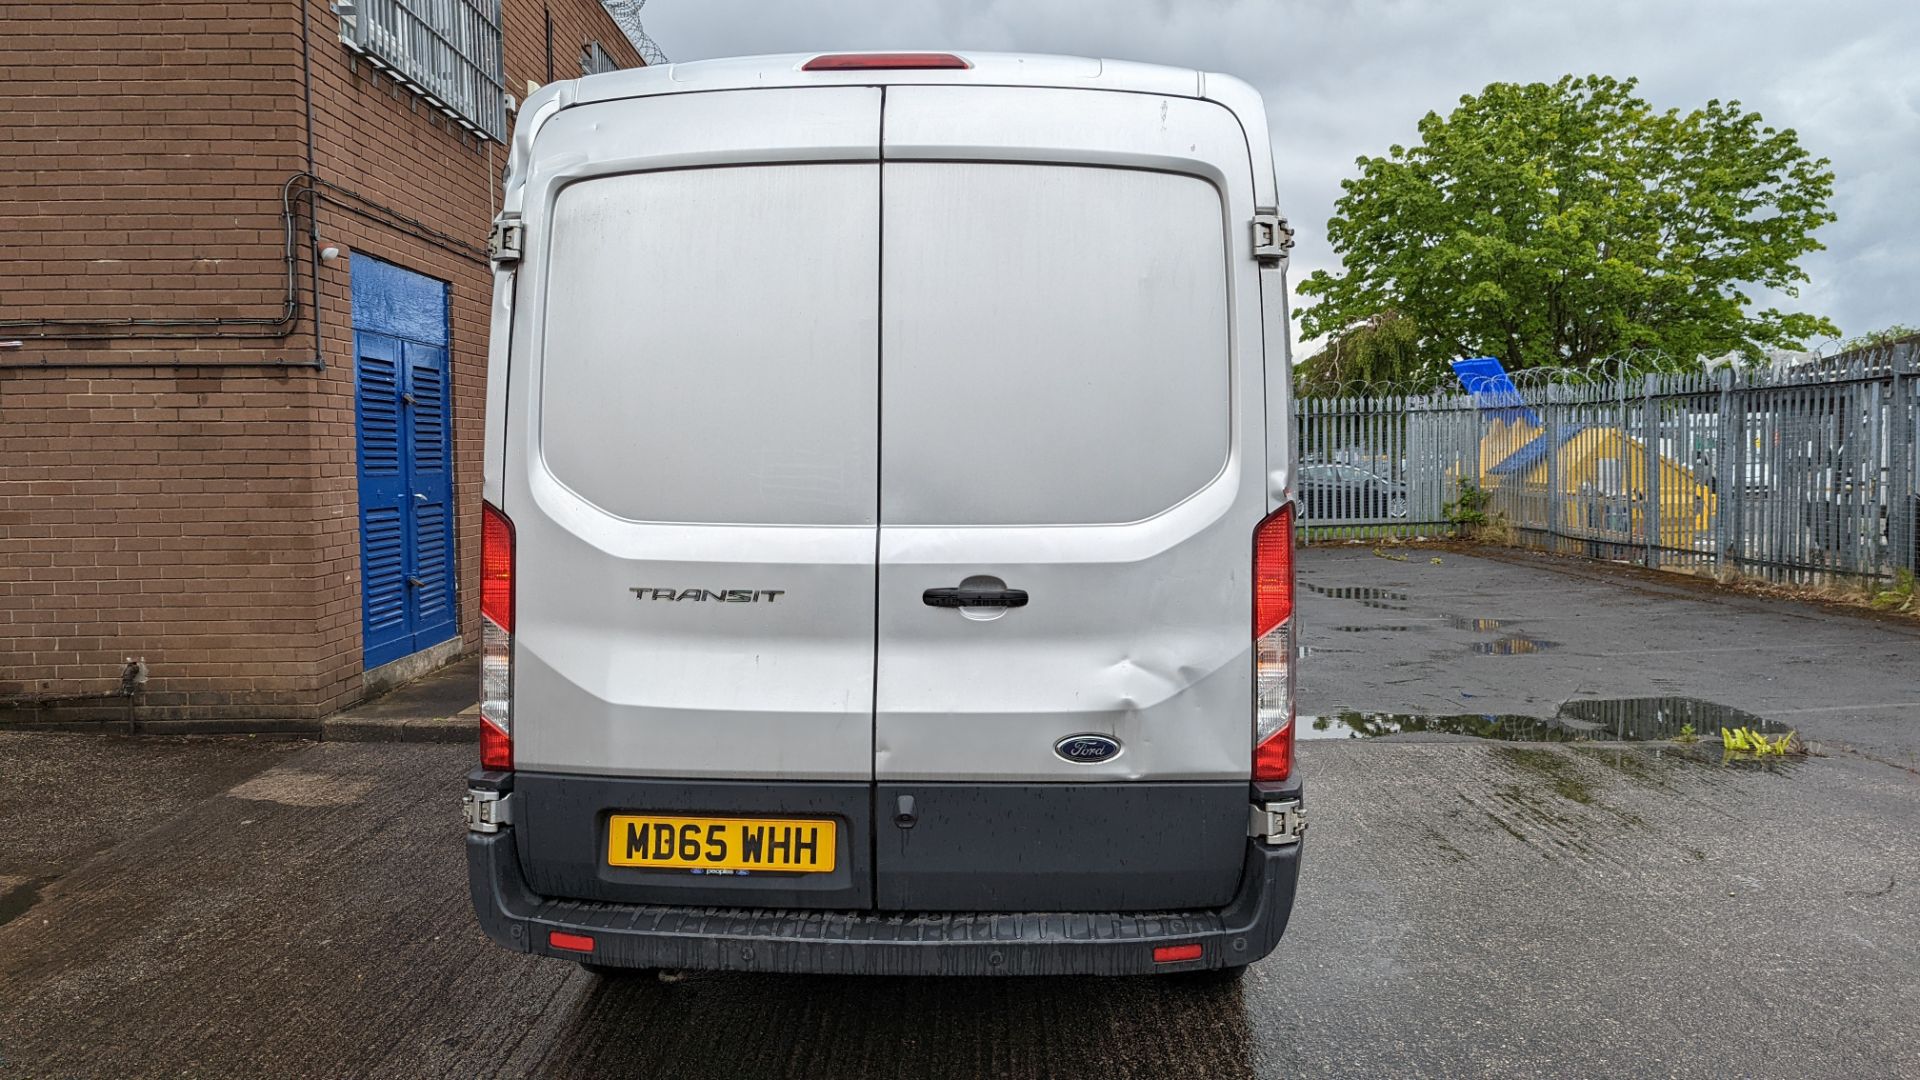 MD65 WHH Ford Transit 350, 6-speed manual gearbox, 2198cc diesel engine, 5981mm x 2550mm. Colour: Si - Image 20 of 51